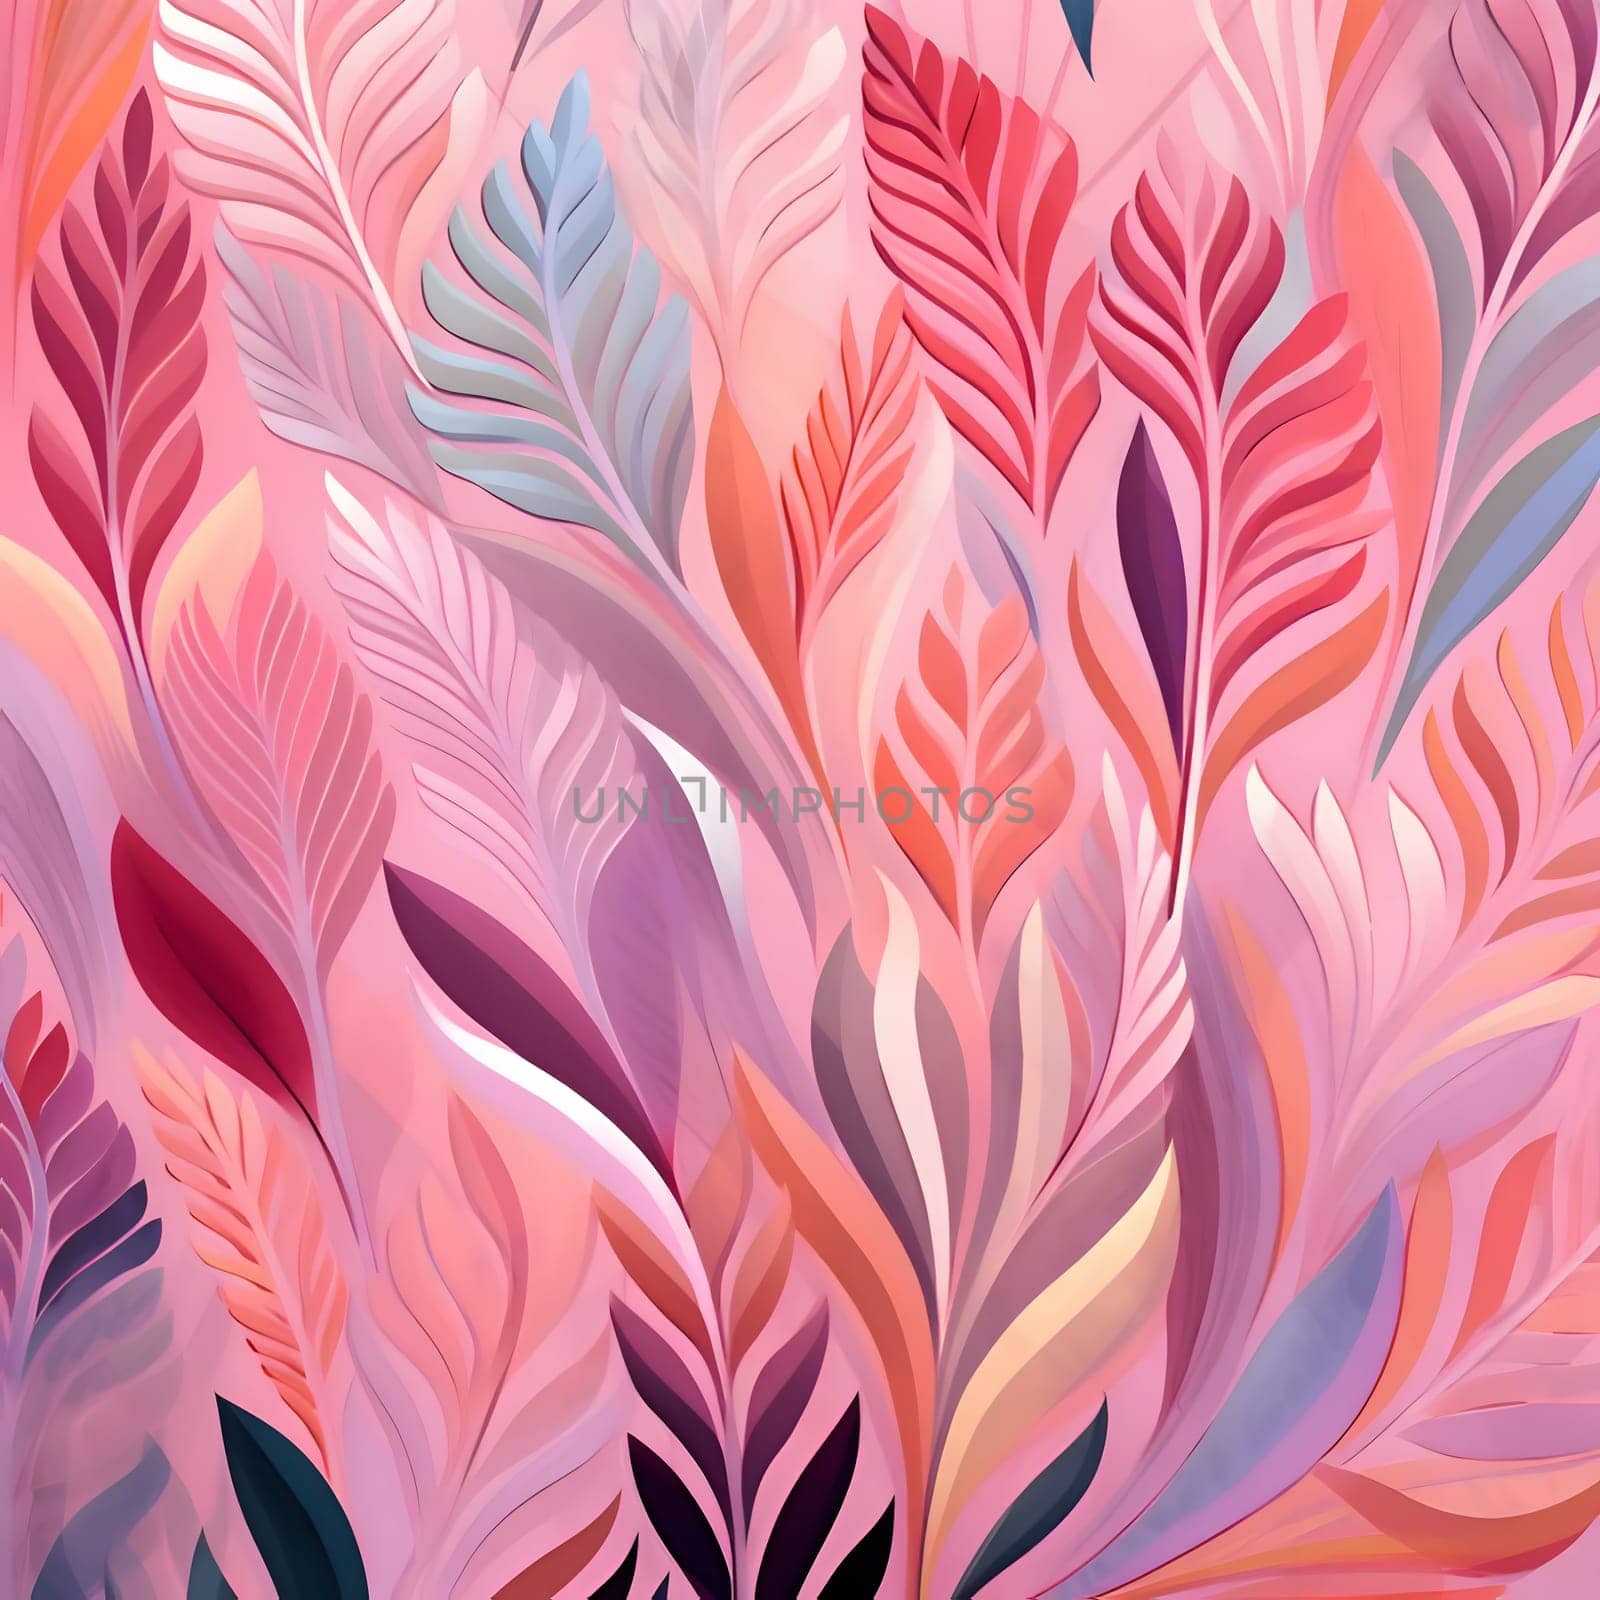 Patterns and banners backgrounds: Seamless pattern with pink and purple leaves. Vector illustration.